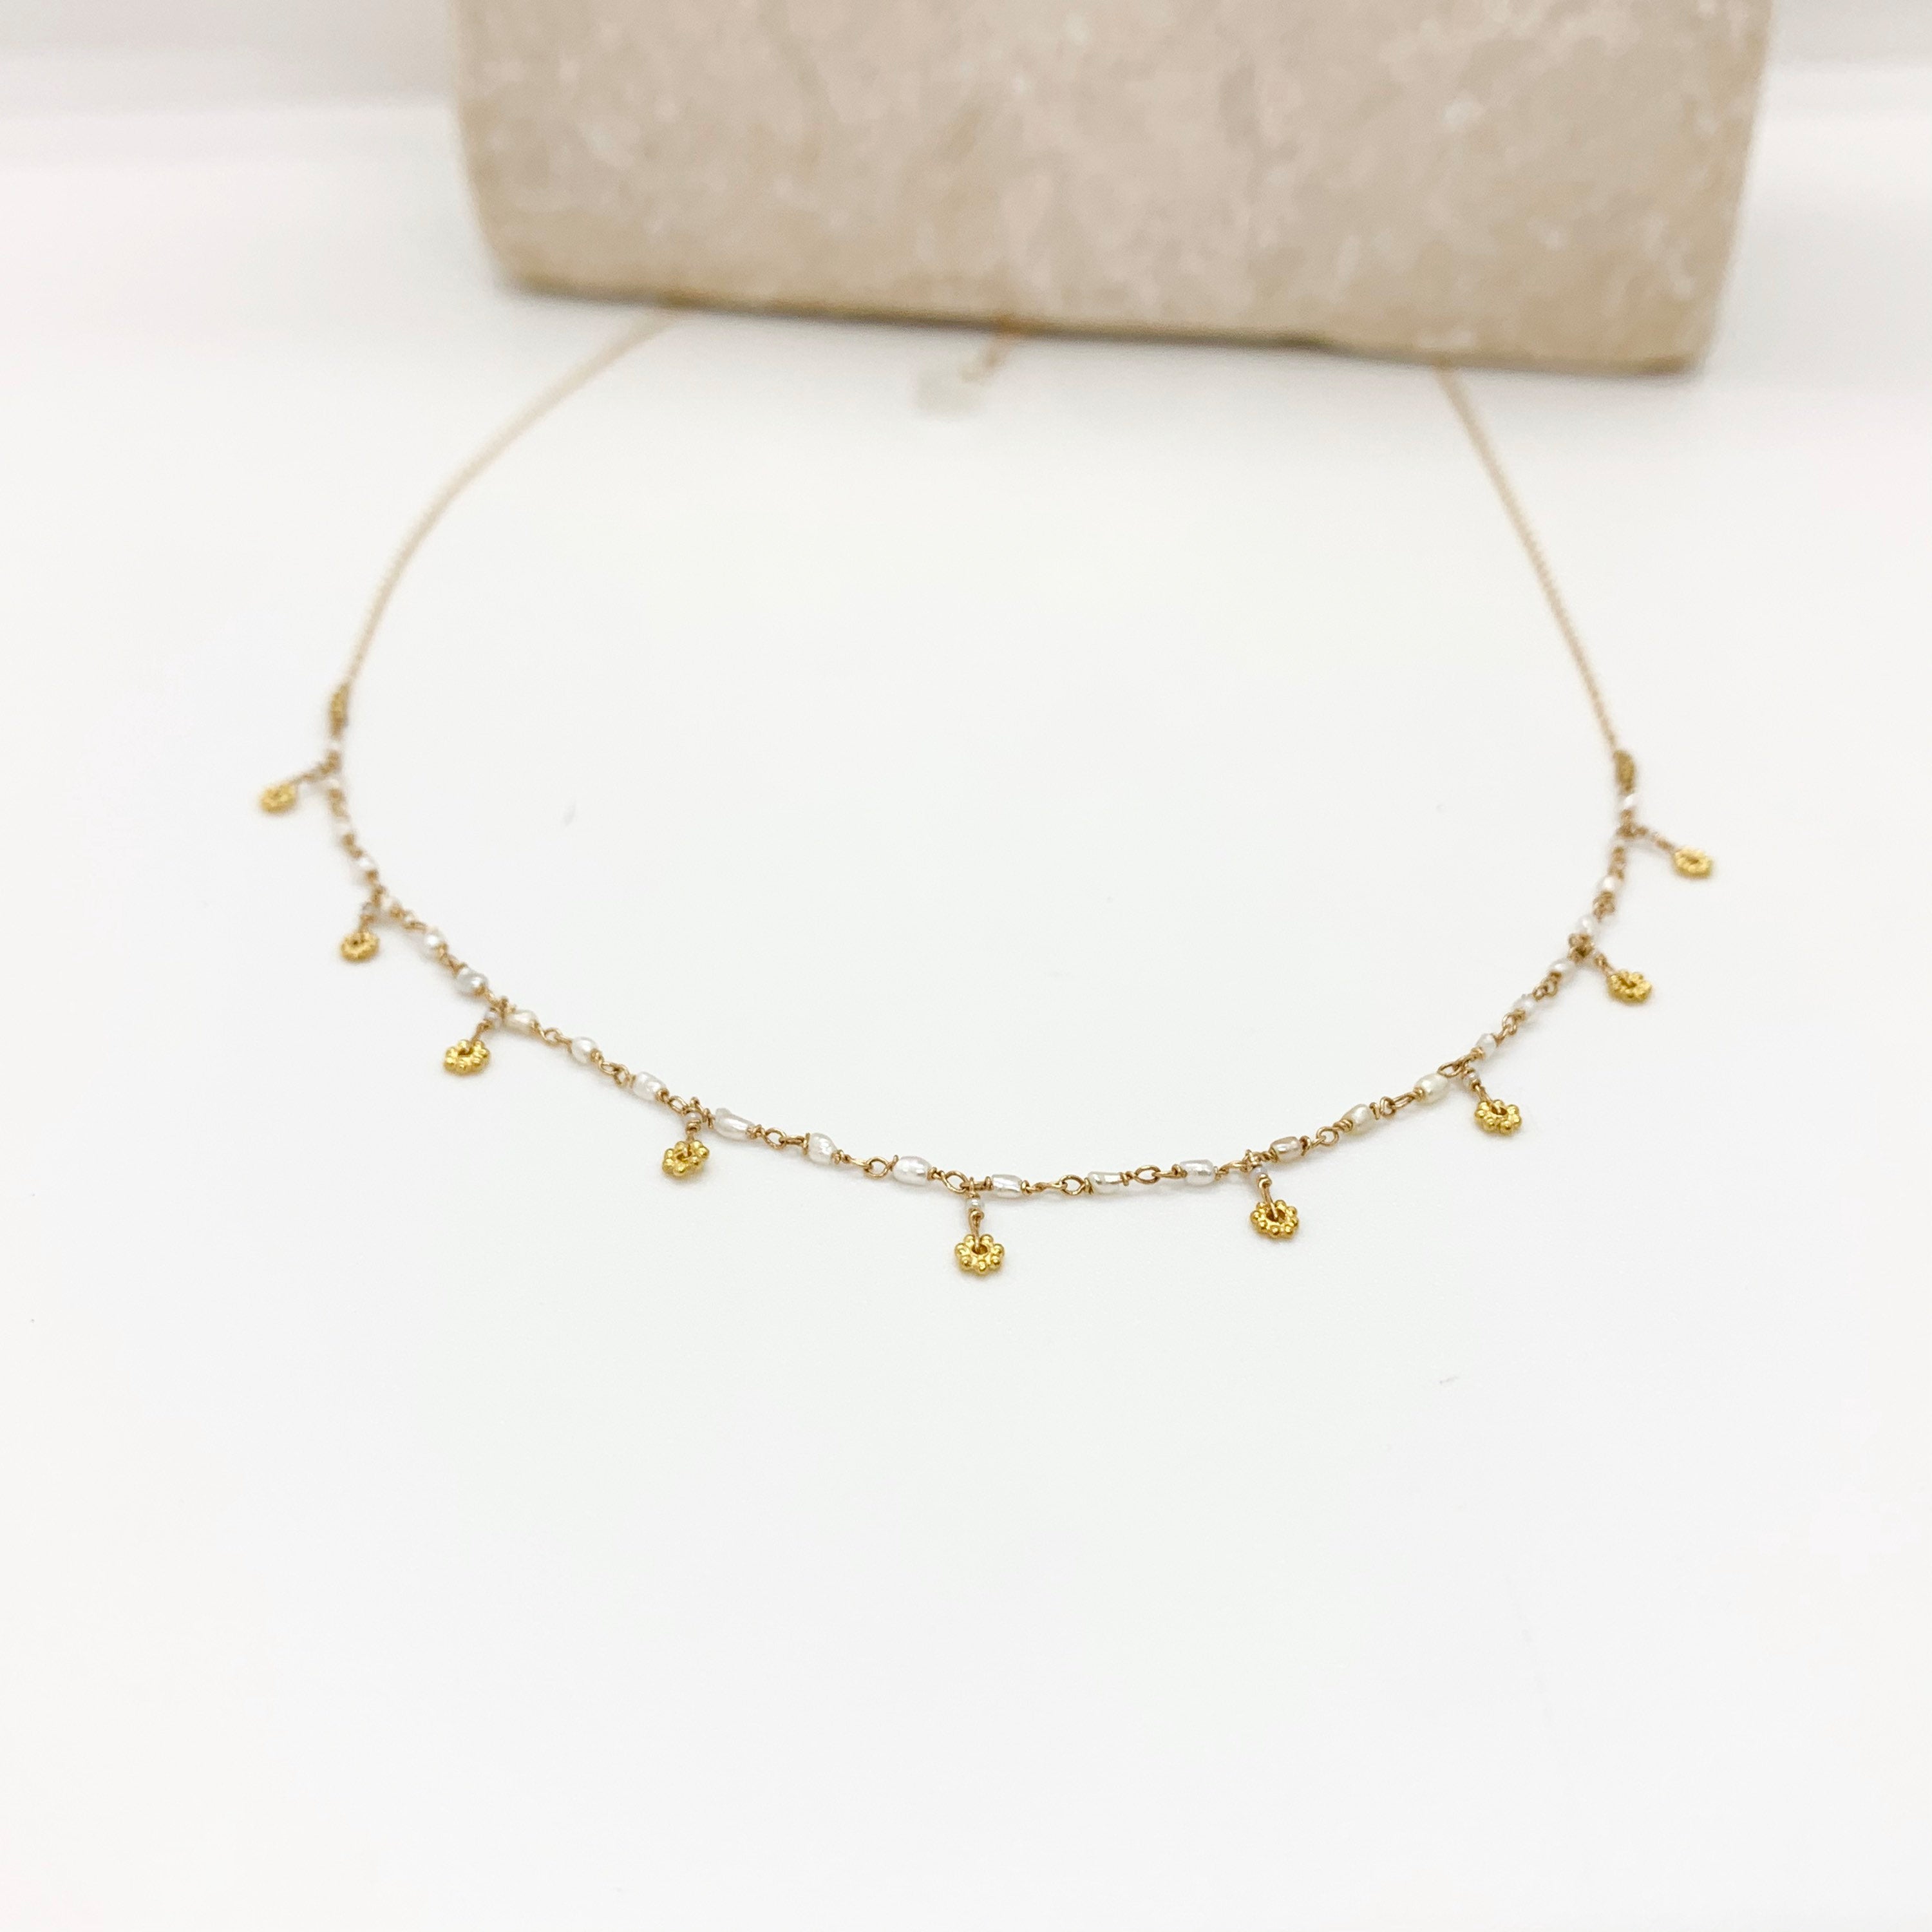 14k Gold Chain Necklace w/ Keshi Pearls, 18k Gold Daisies, 18k Gold Nuggets & Antique Italian Beads